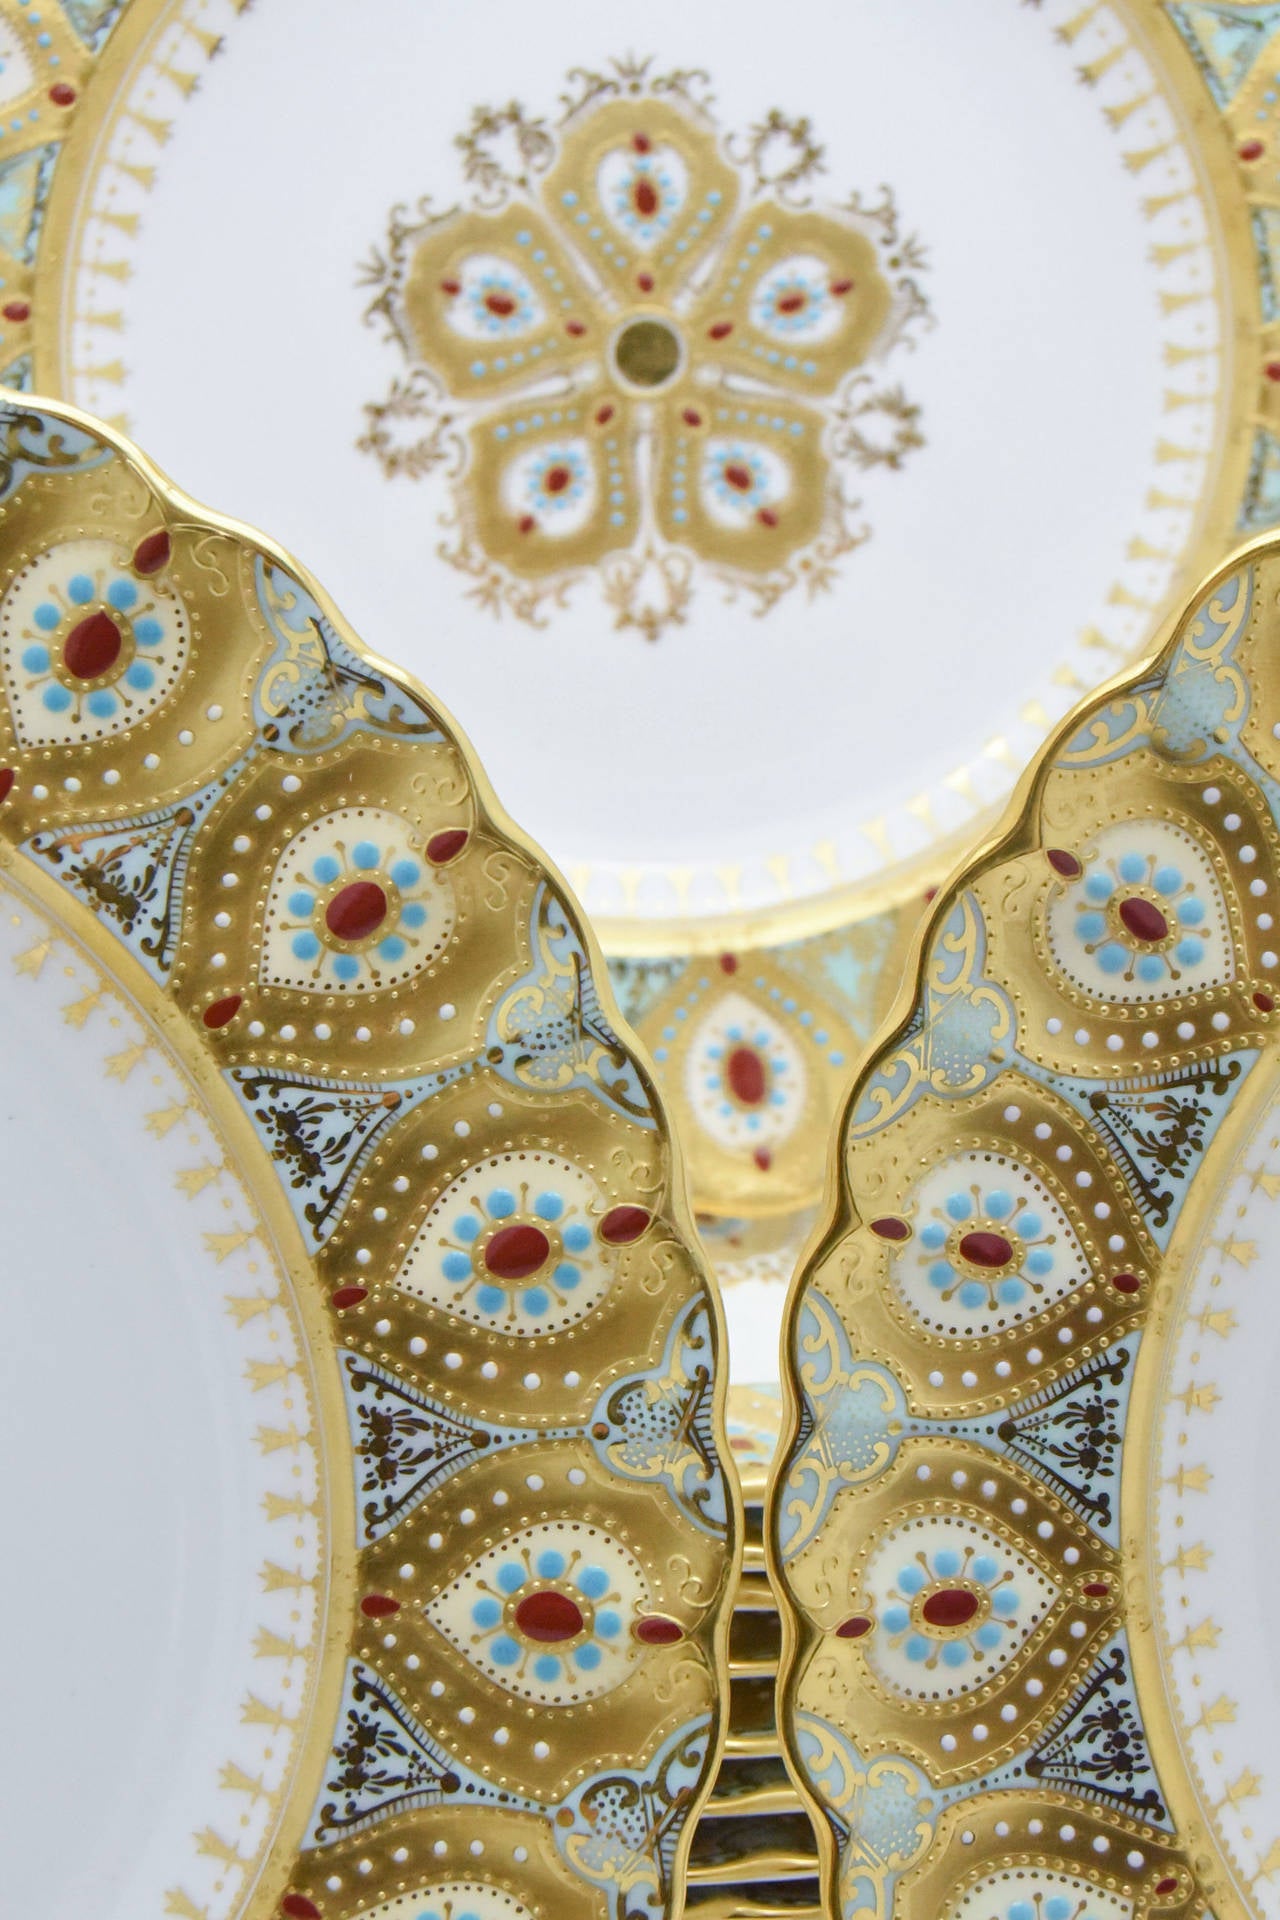 This amazing set of 12 dinner plates, made by Copelands Spode, are fit for royalty. Each plate is decorated with one of the most elaborate and labor intensive methods of gold overlay and set with multicolored 